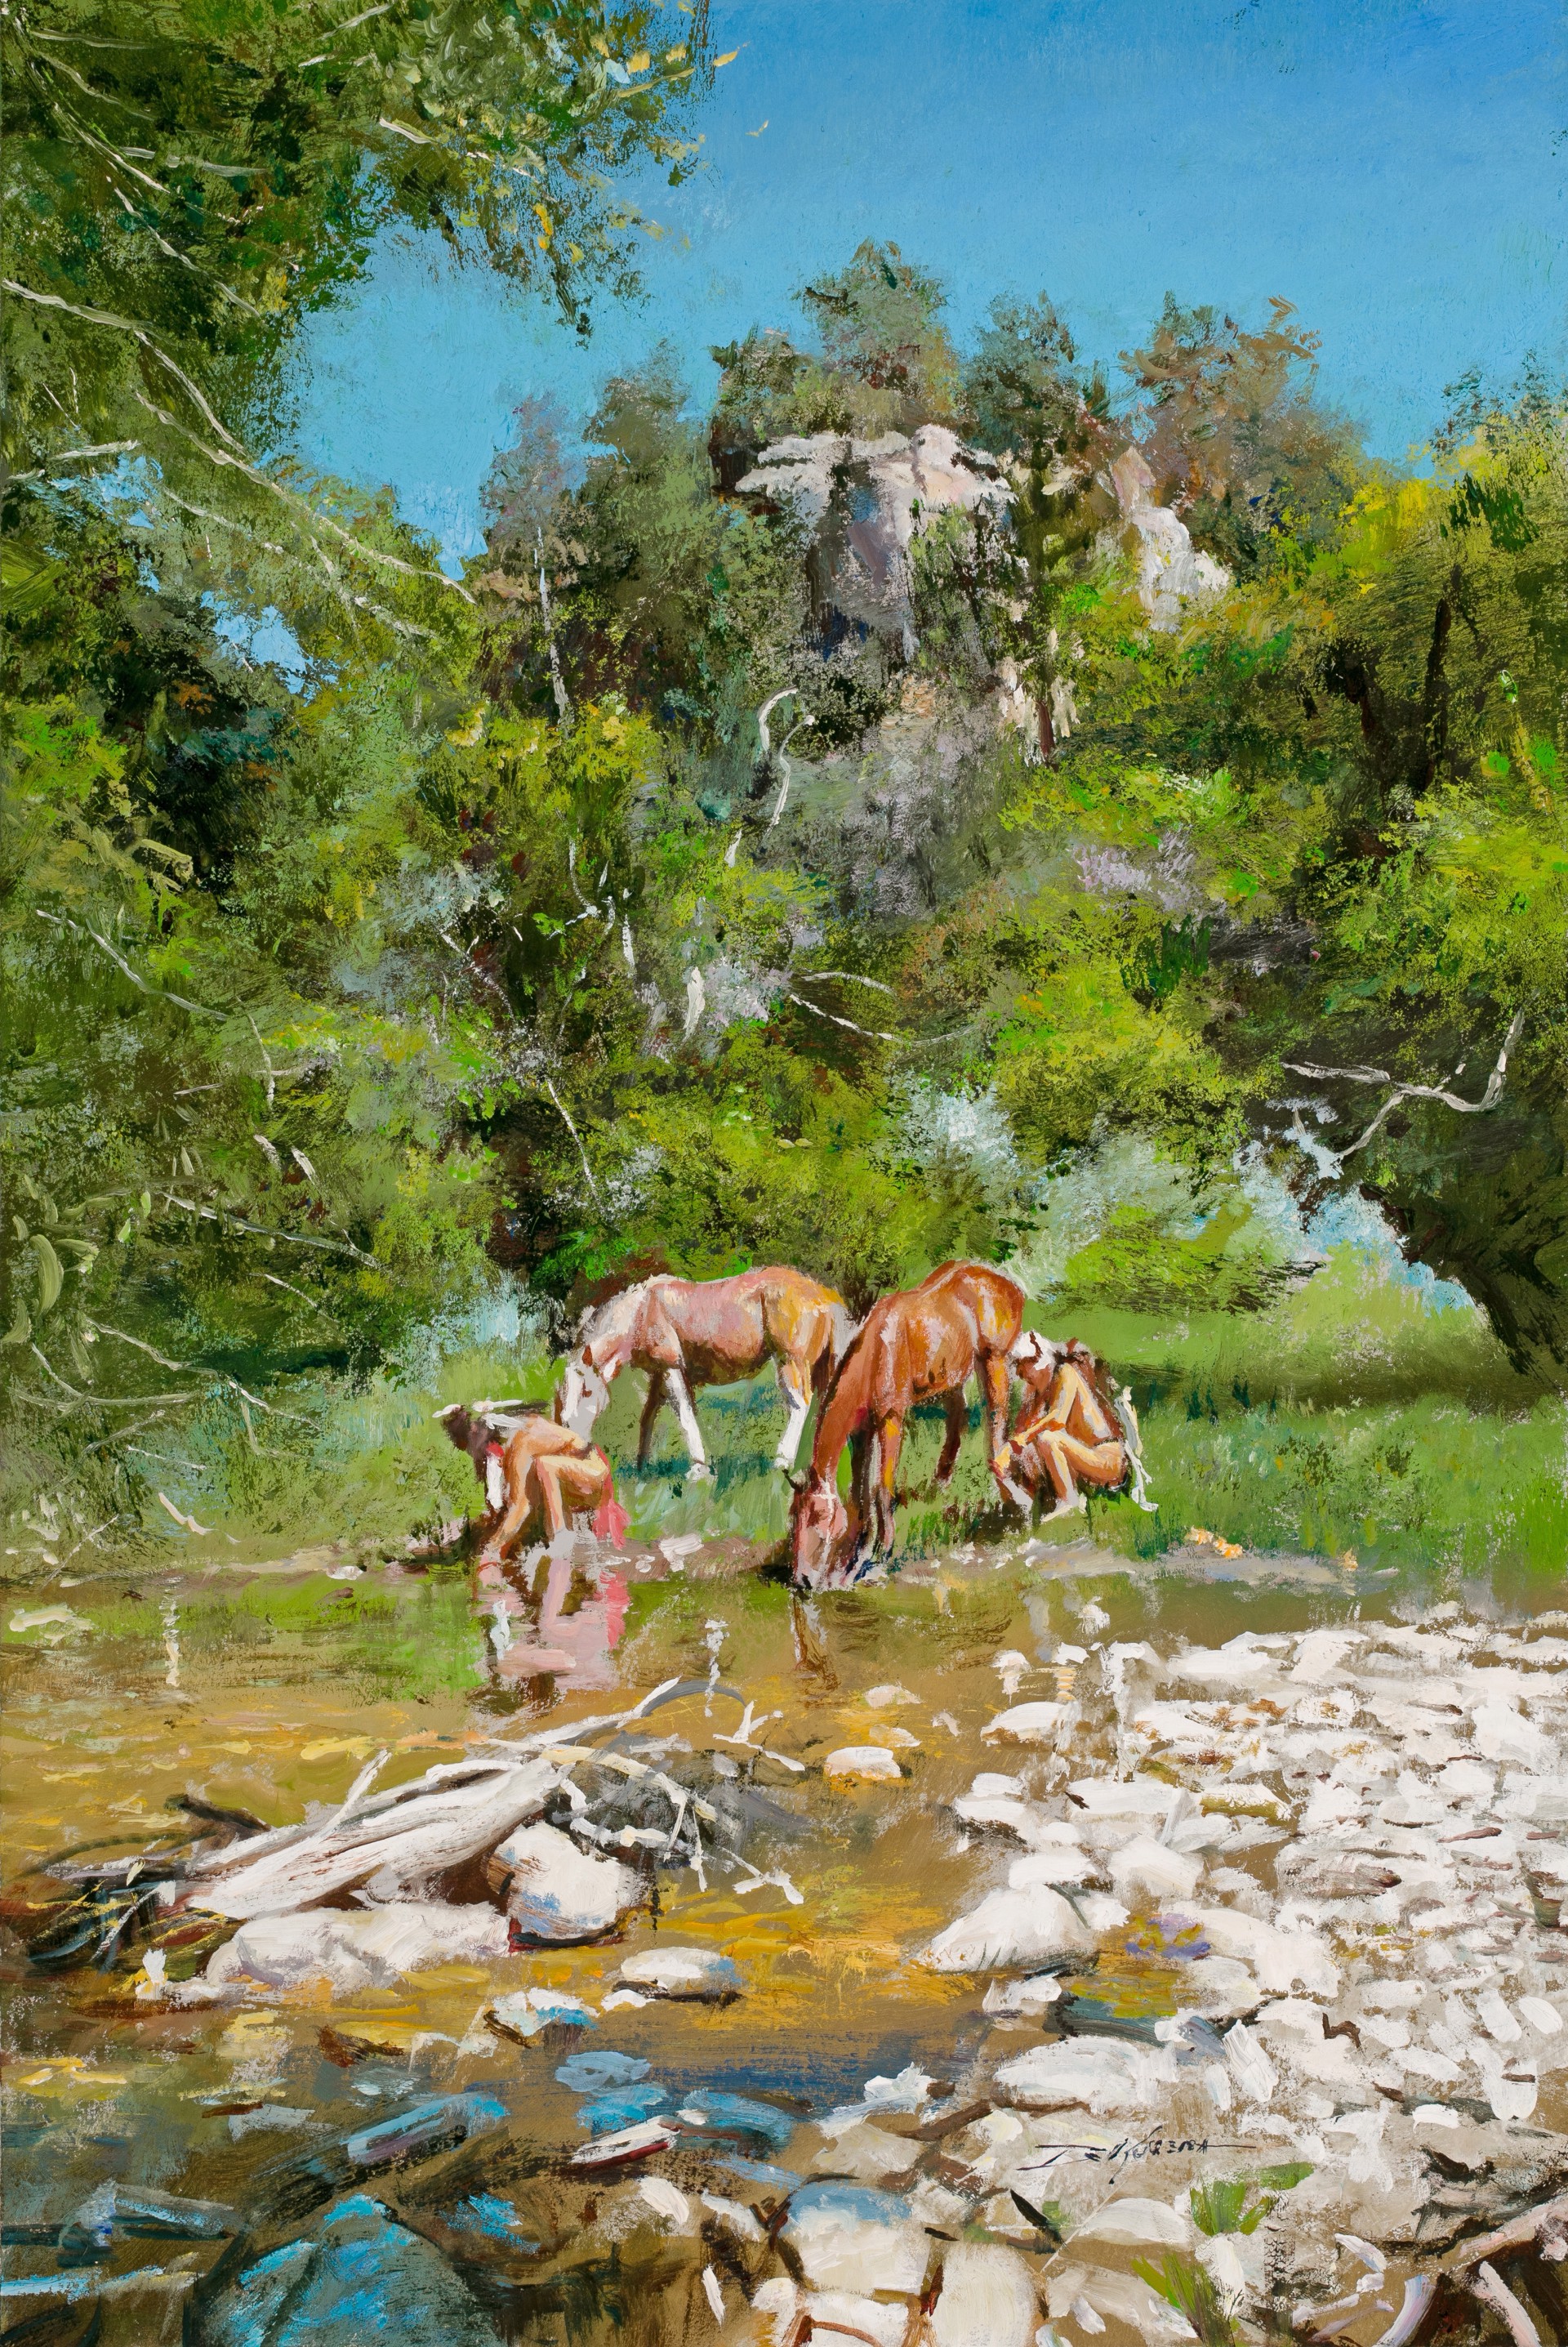 Water for Their Horses by D. Edward Kucera